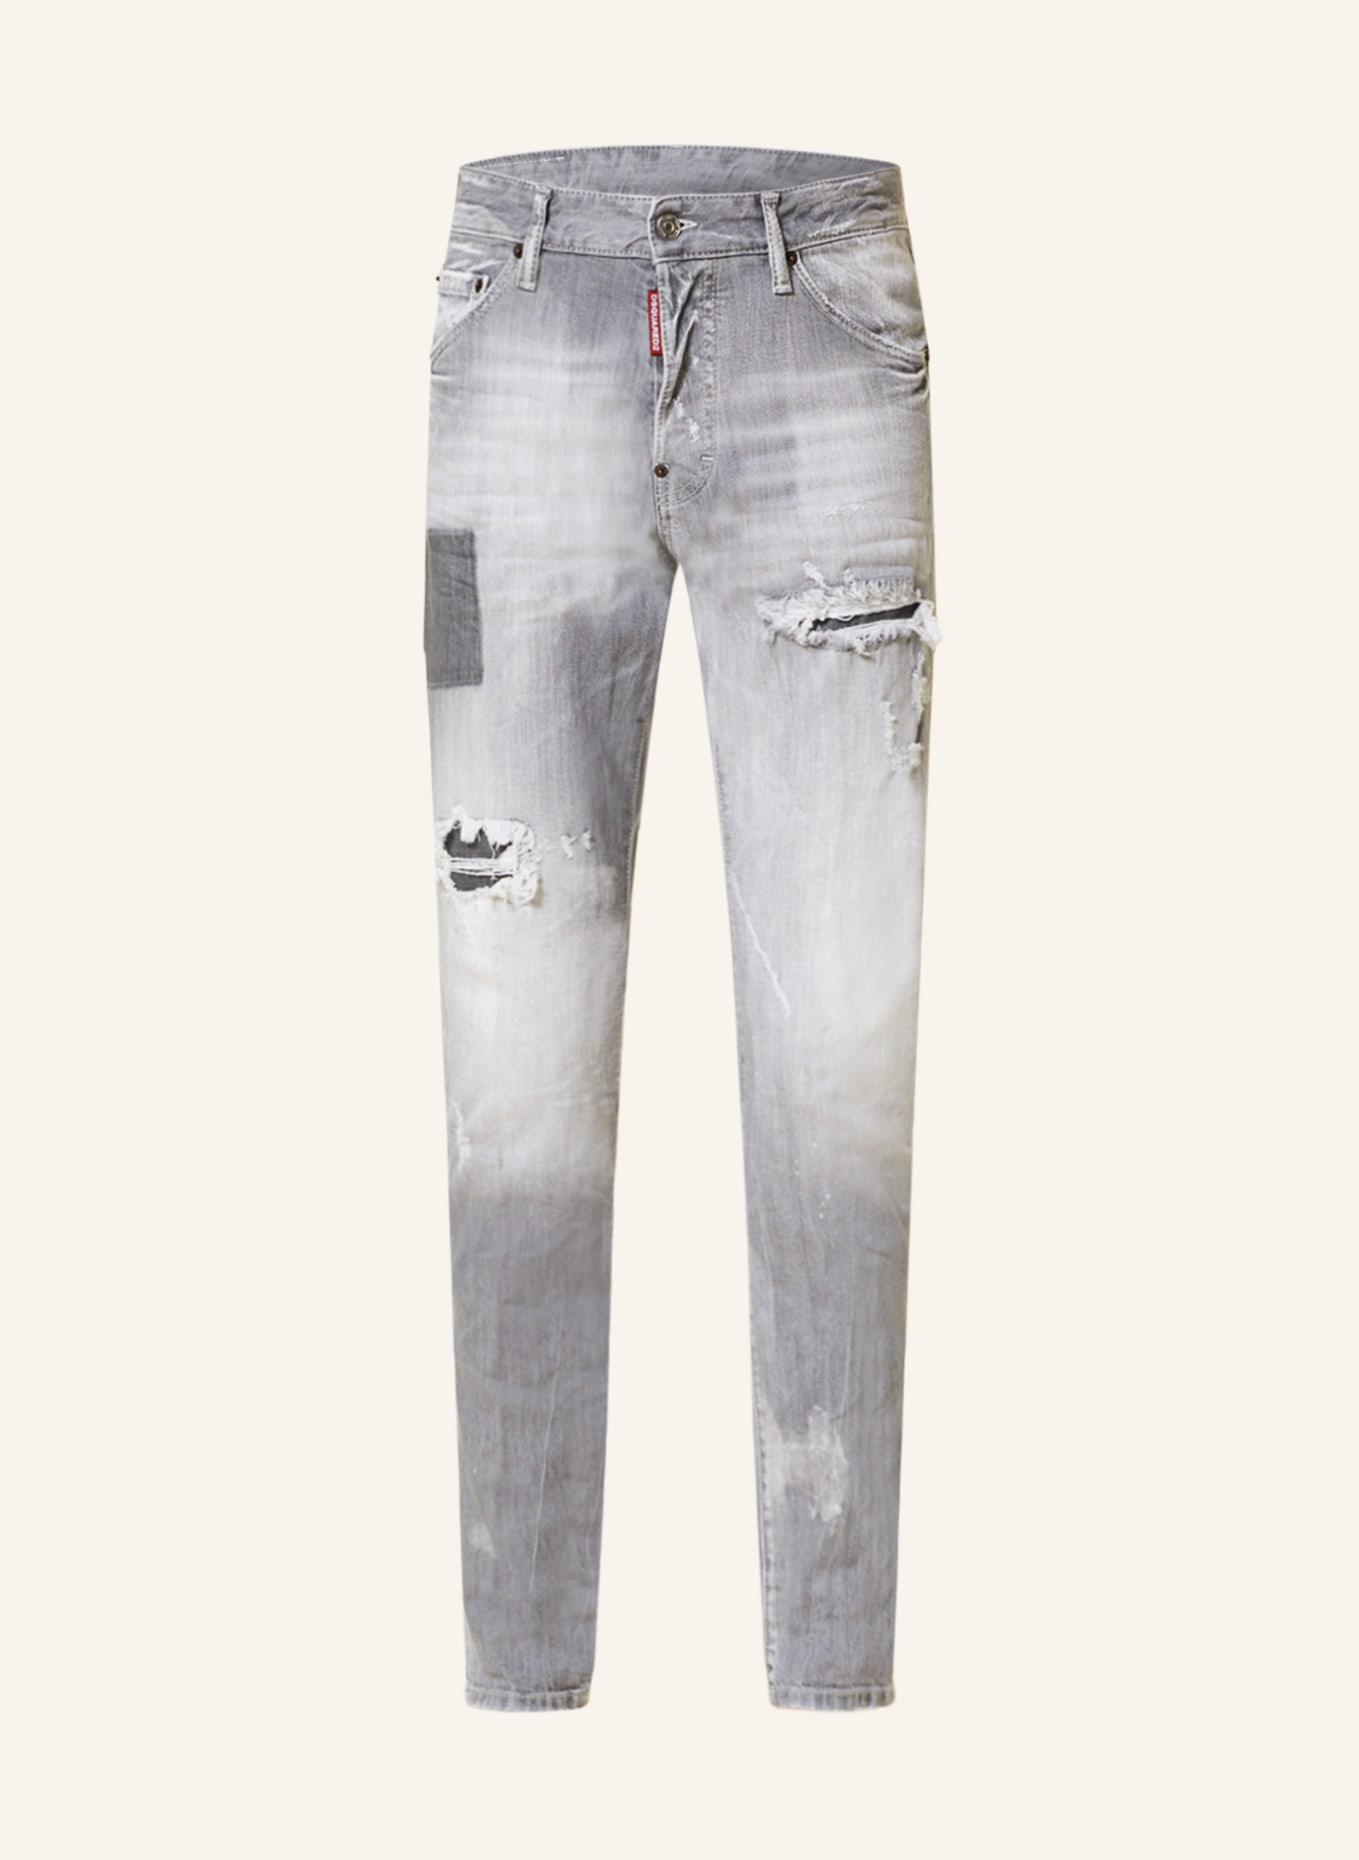 DSQUARED2 Destroyed Jeans COOL GUY Extra Slim Fit, Farbe: 852 GREY (Bild 1)